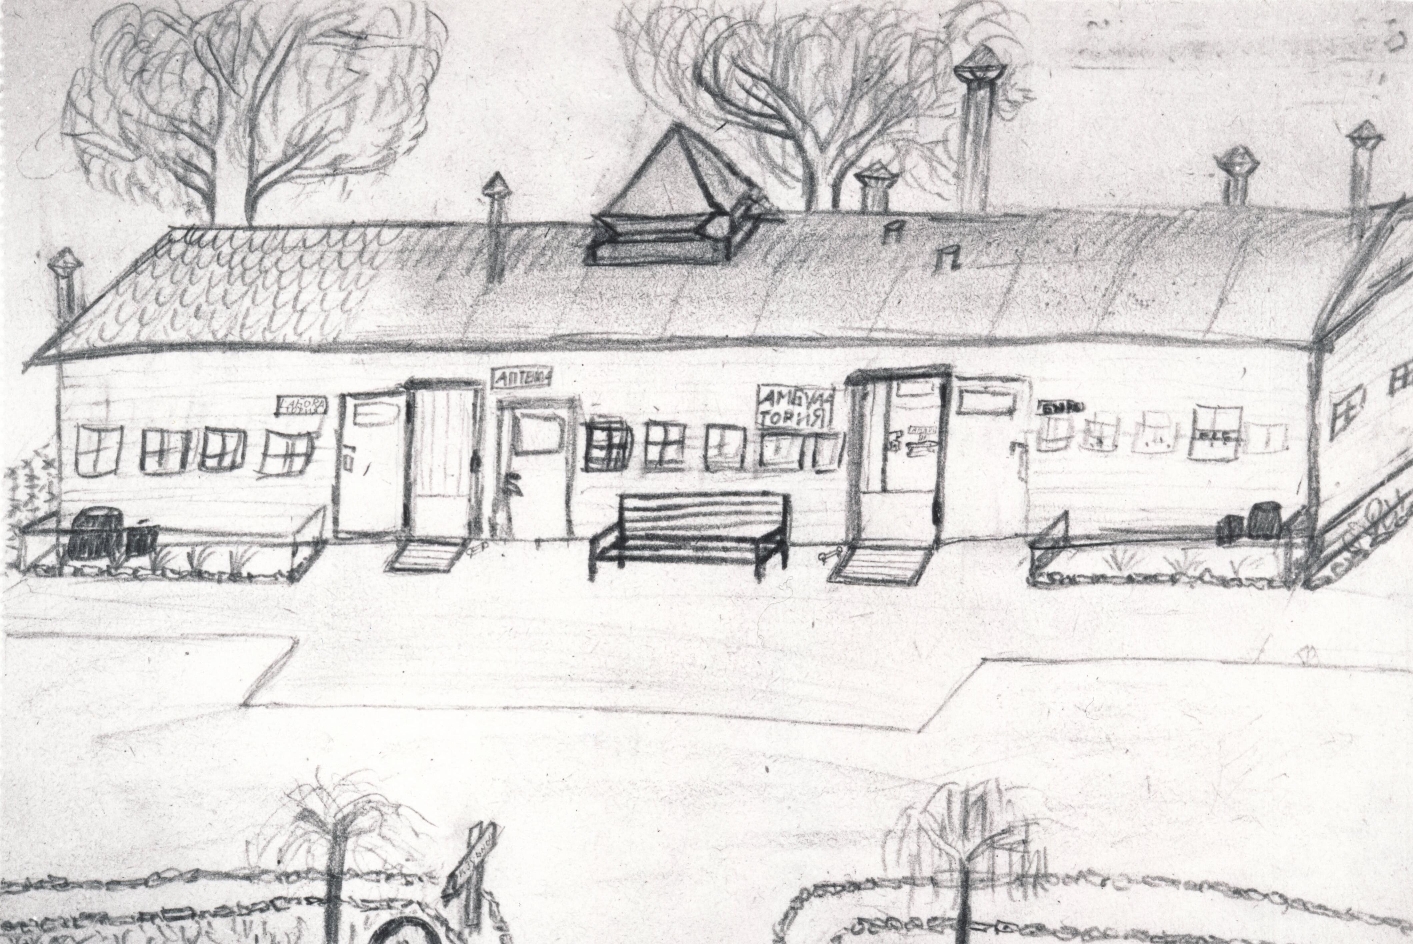 A rudimentary pencil drawing of a one-story barracks with two entrance doors can be seen. there is a bench between the doors. The roof of the barrack has a small pyramid-shaped structure in the middle.